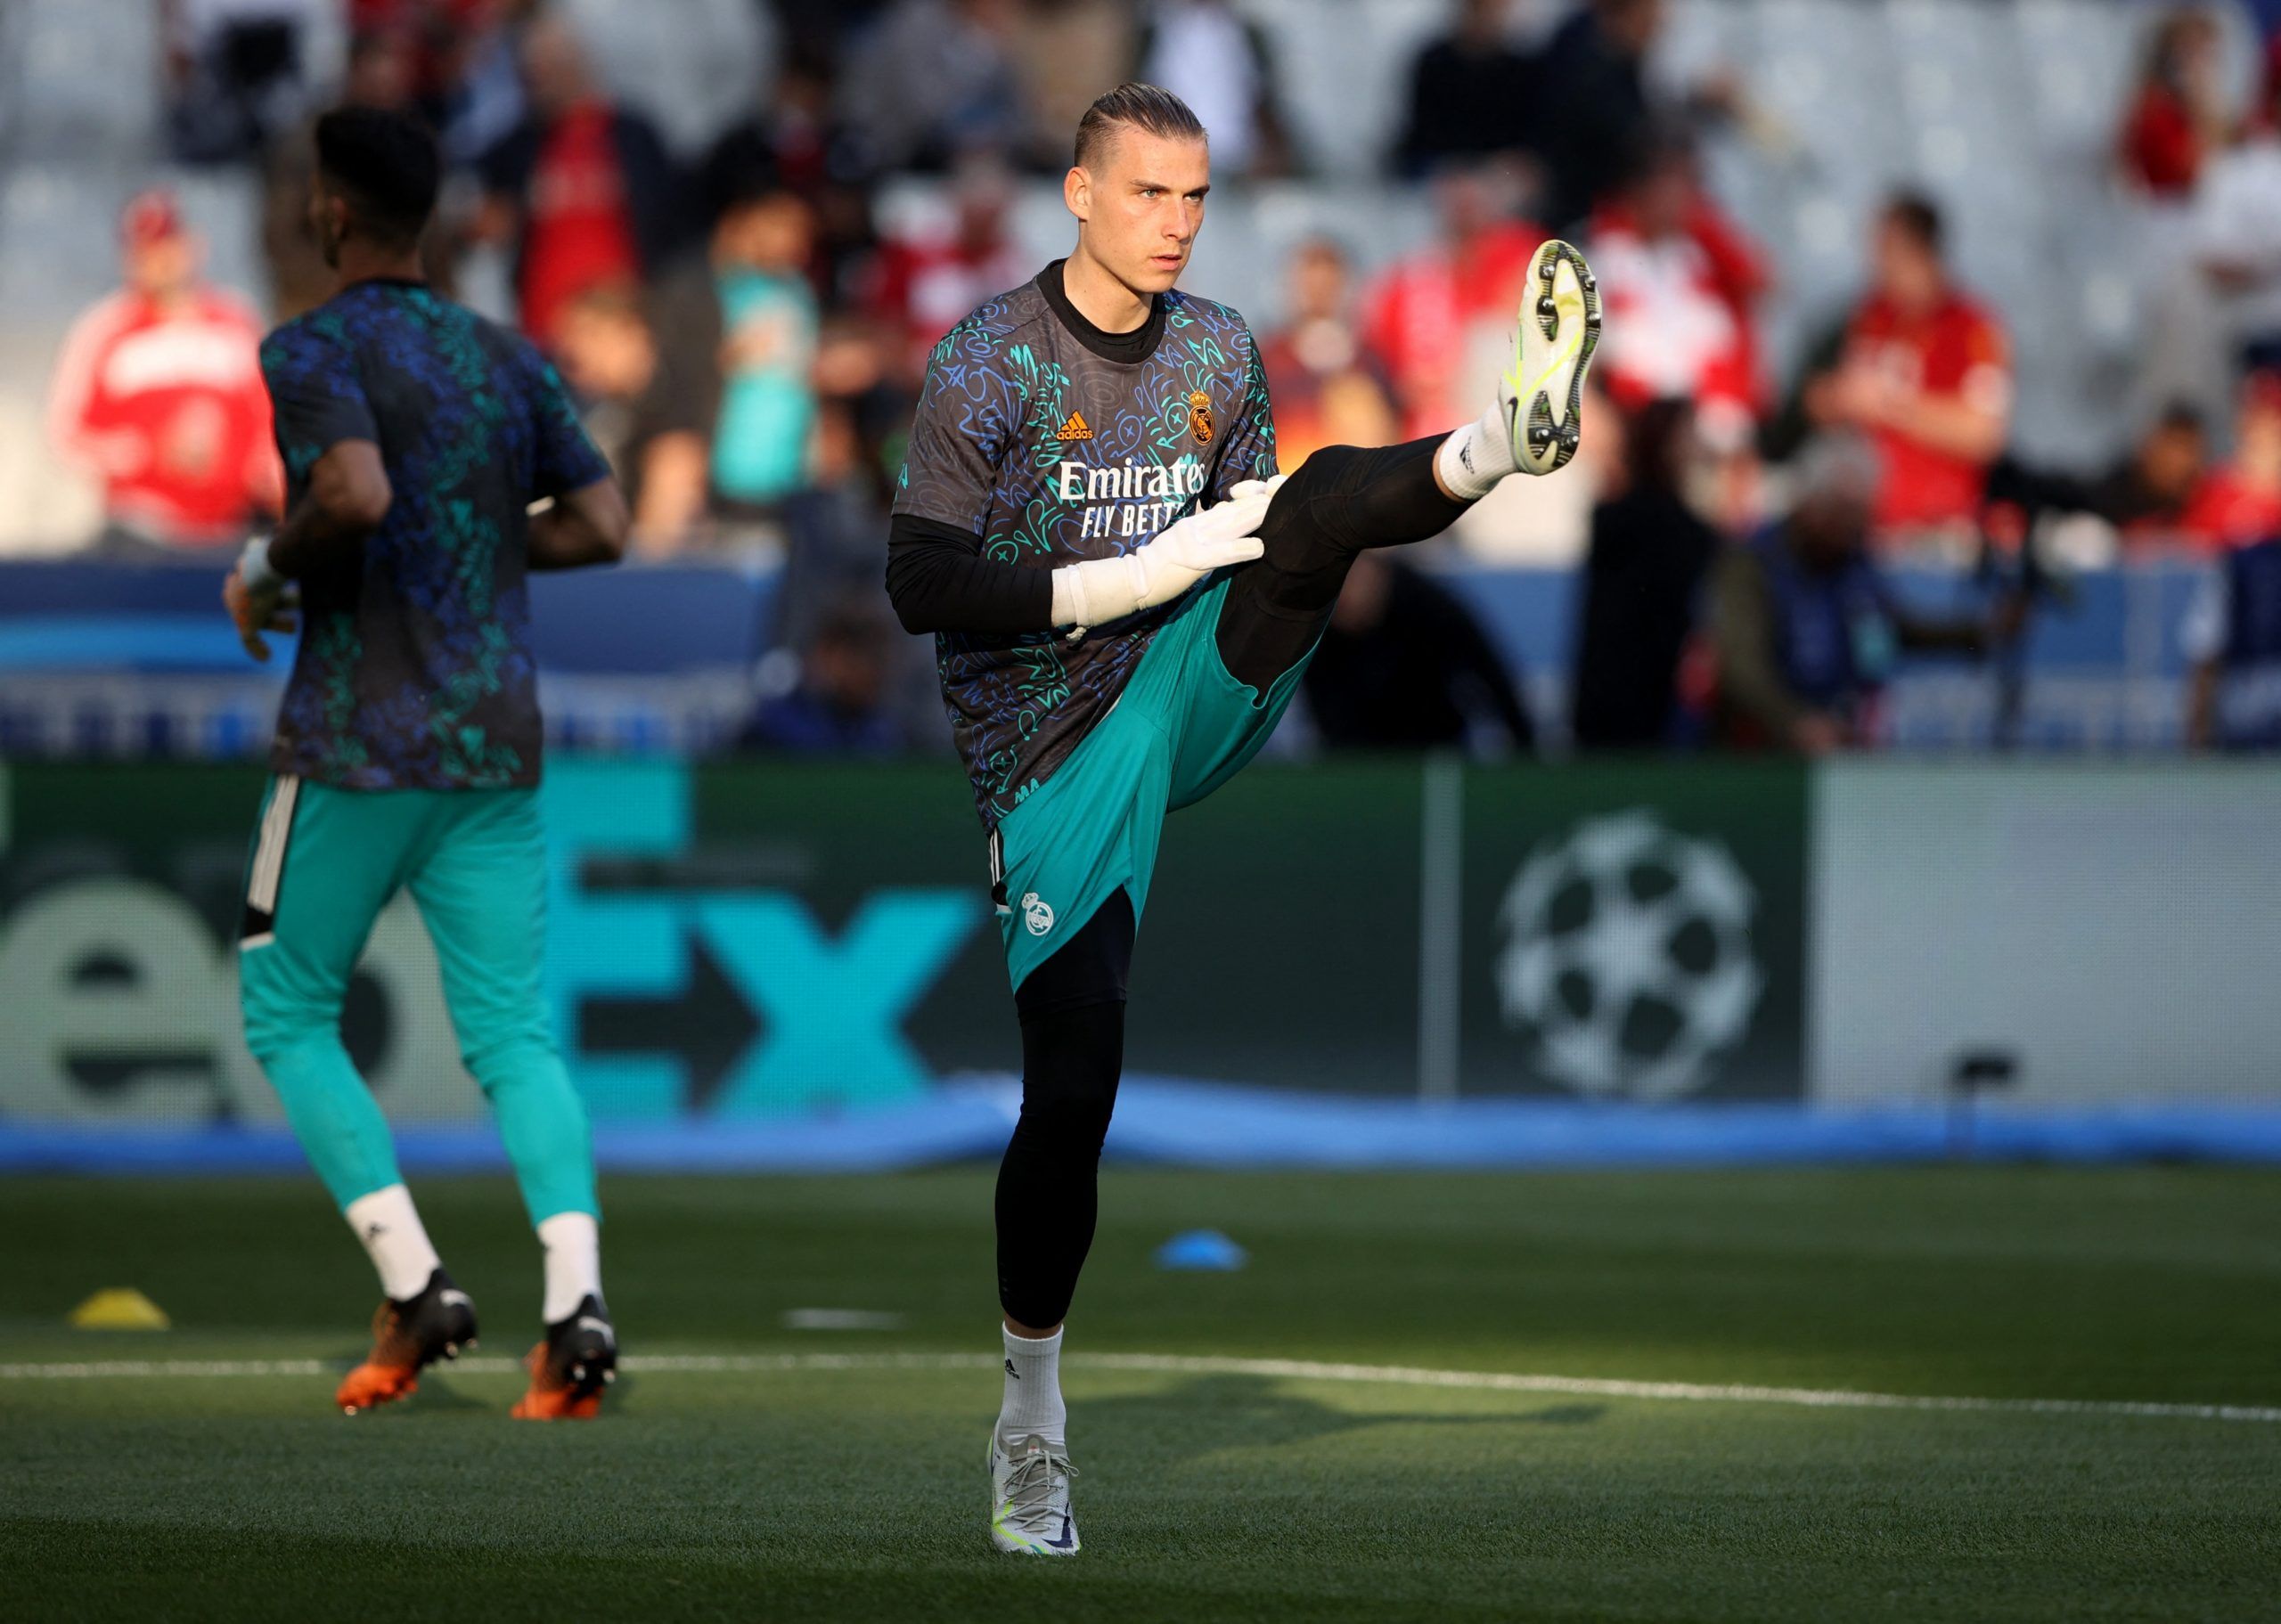 Soccer Football - Champions League Final - Liverpool v Real Madrid - Stade de France, Saint-Denis near Paris, France - May 28, 2022 Real Madrid's Andriy Lunin during the warm up before the match REUTERS/Molly Darlington